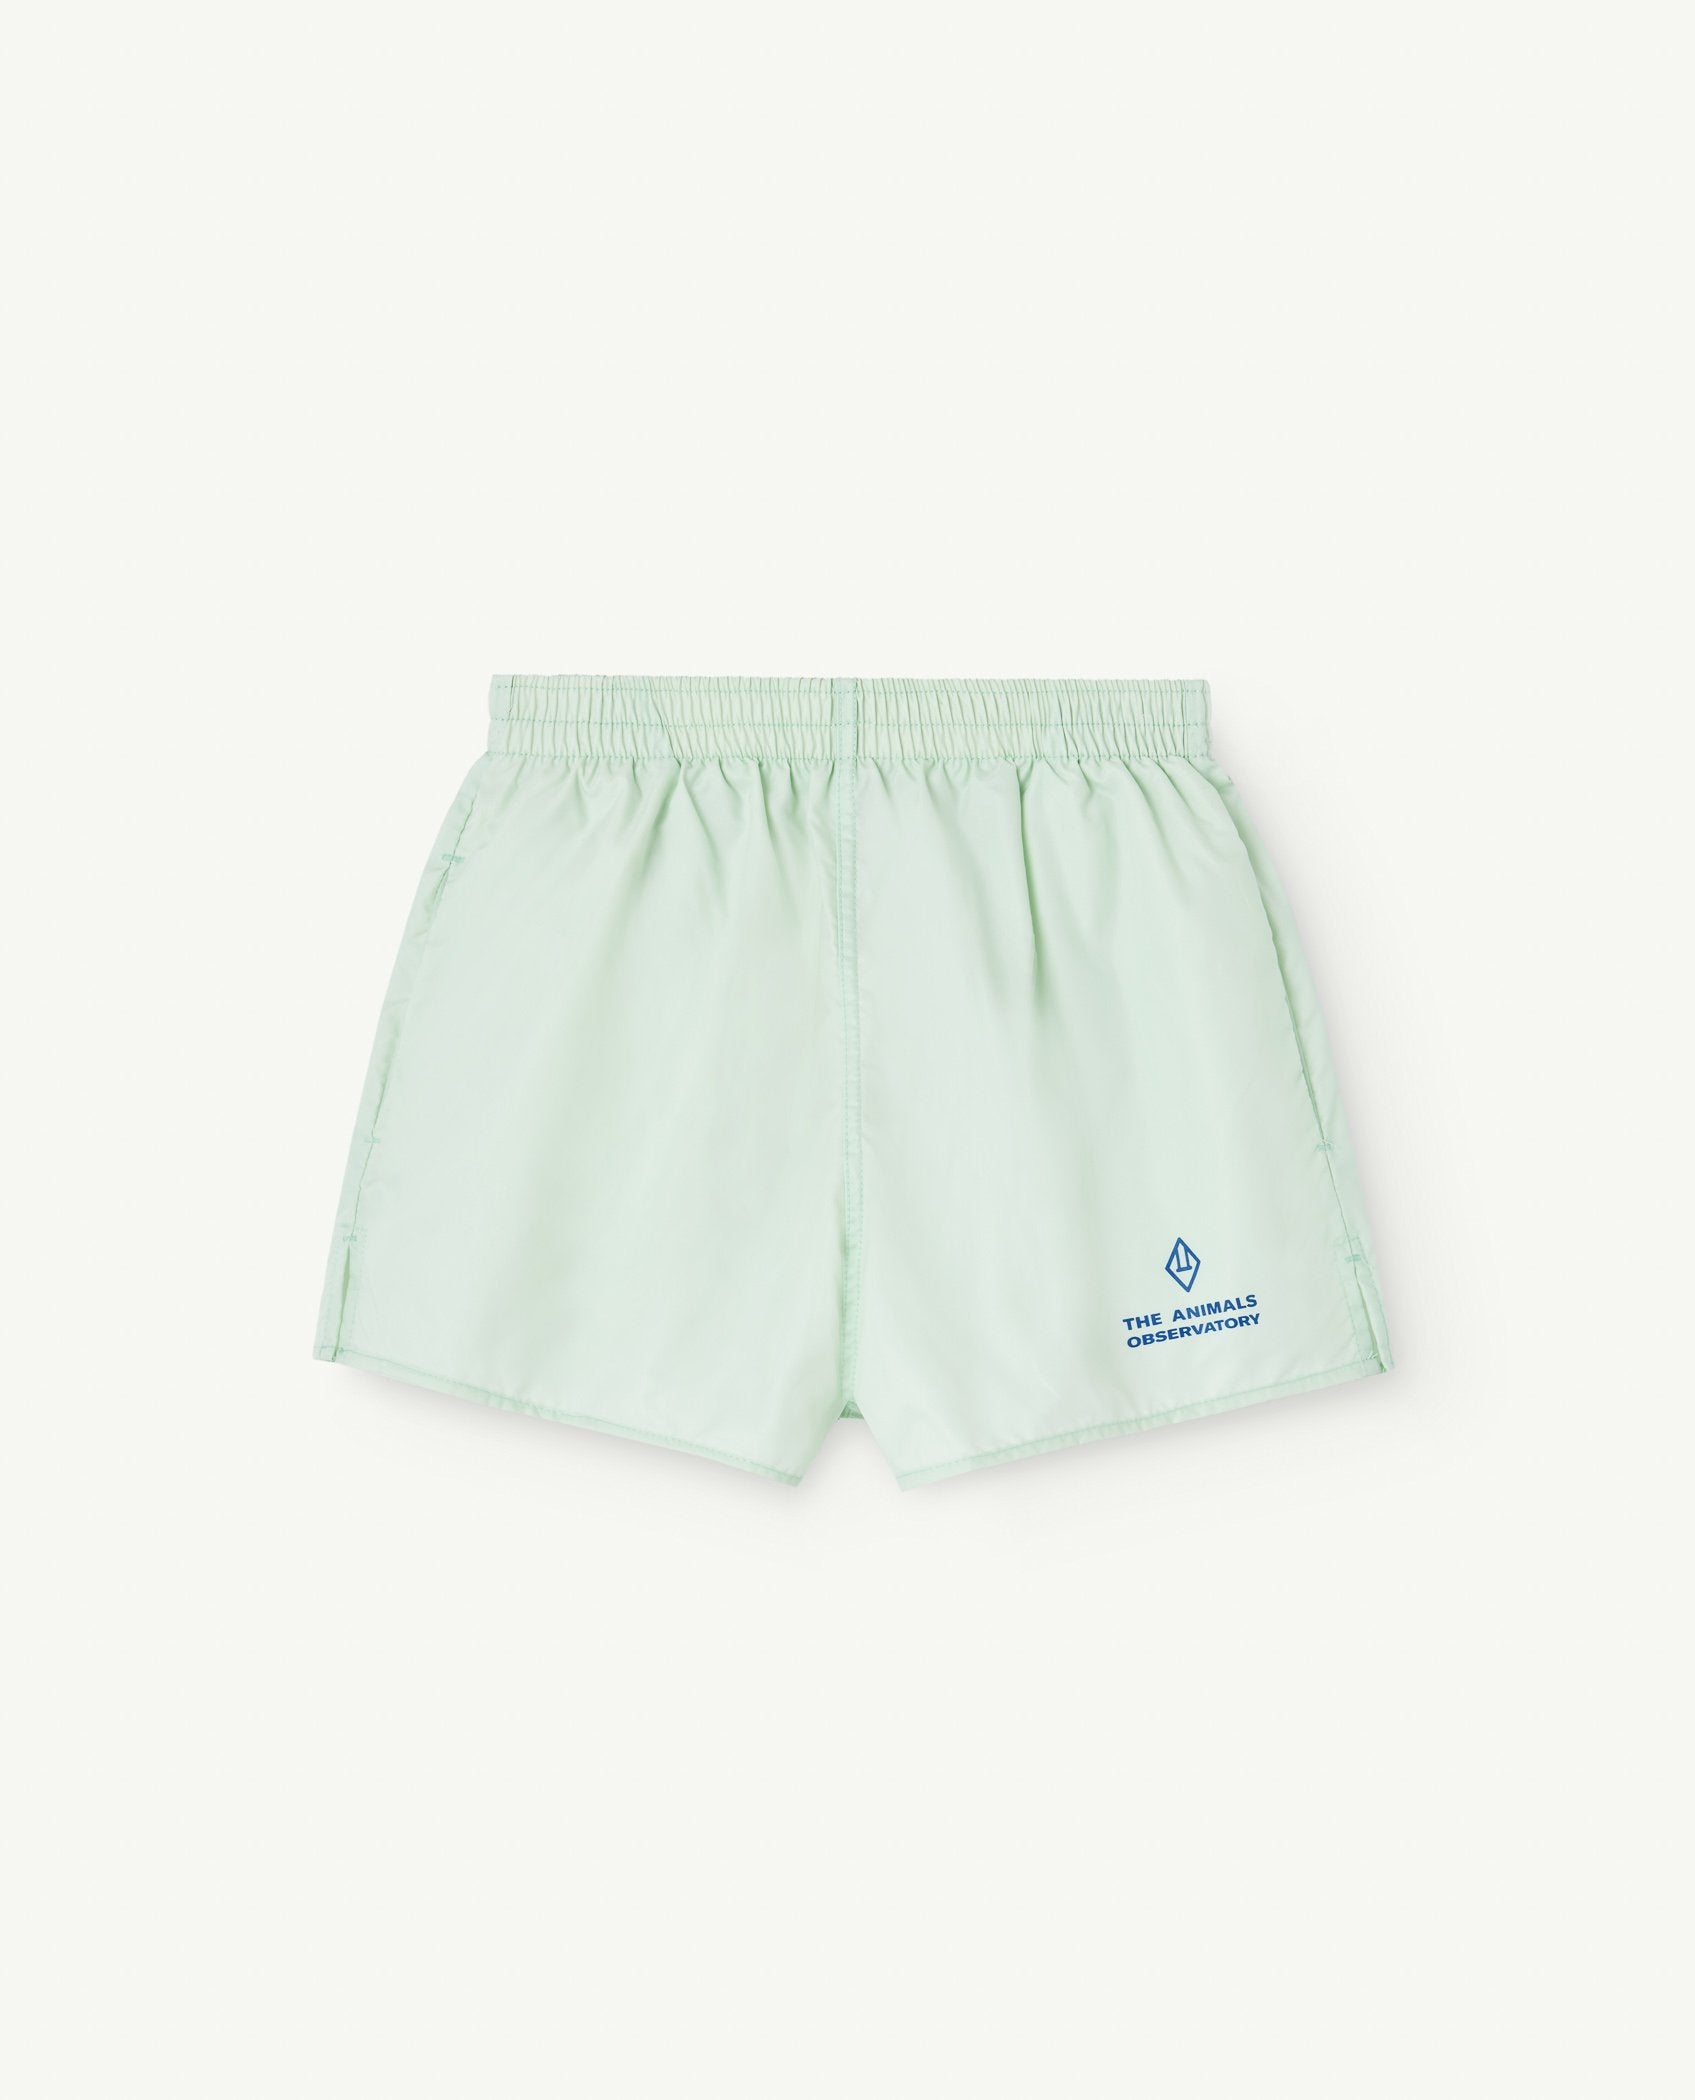 Mint Lynx Kids Shorts PRODUCT FRONT